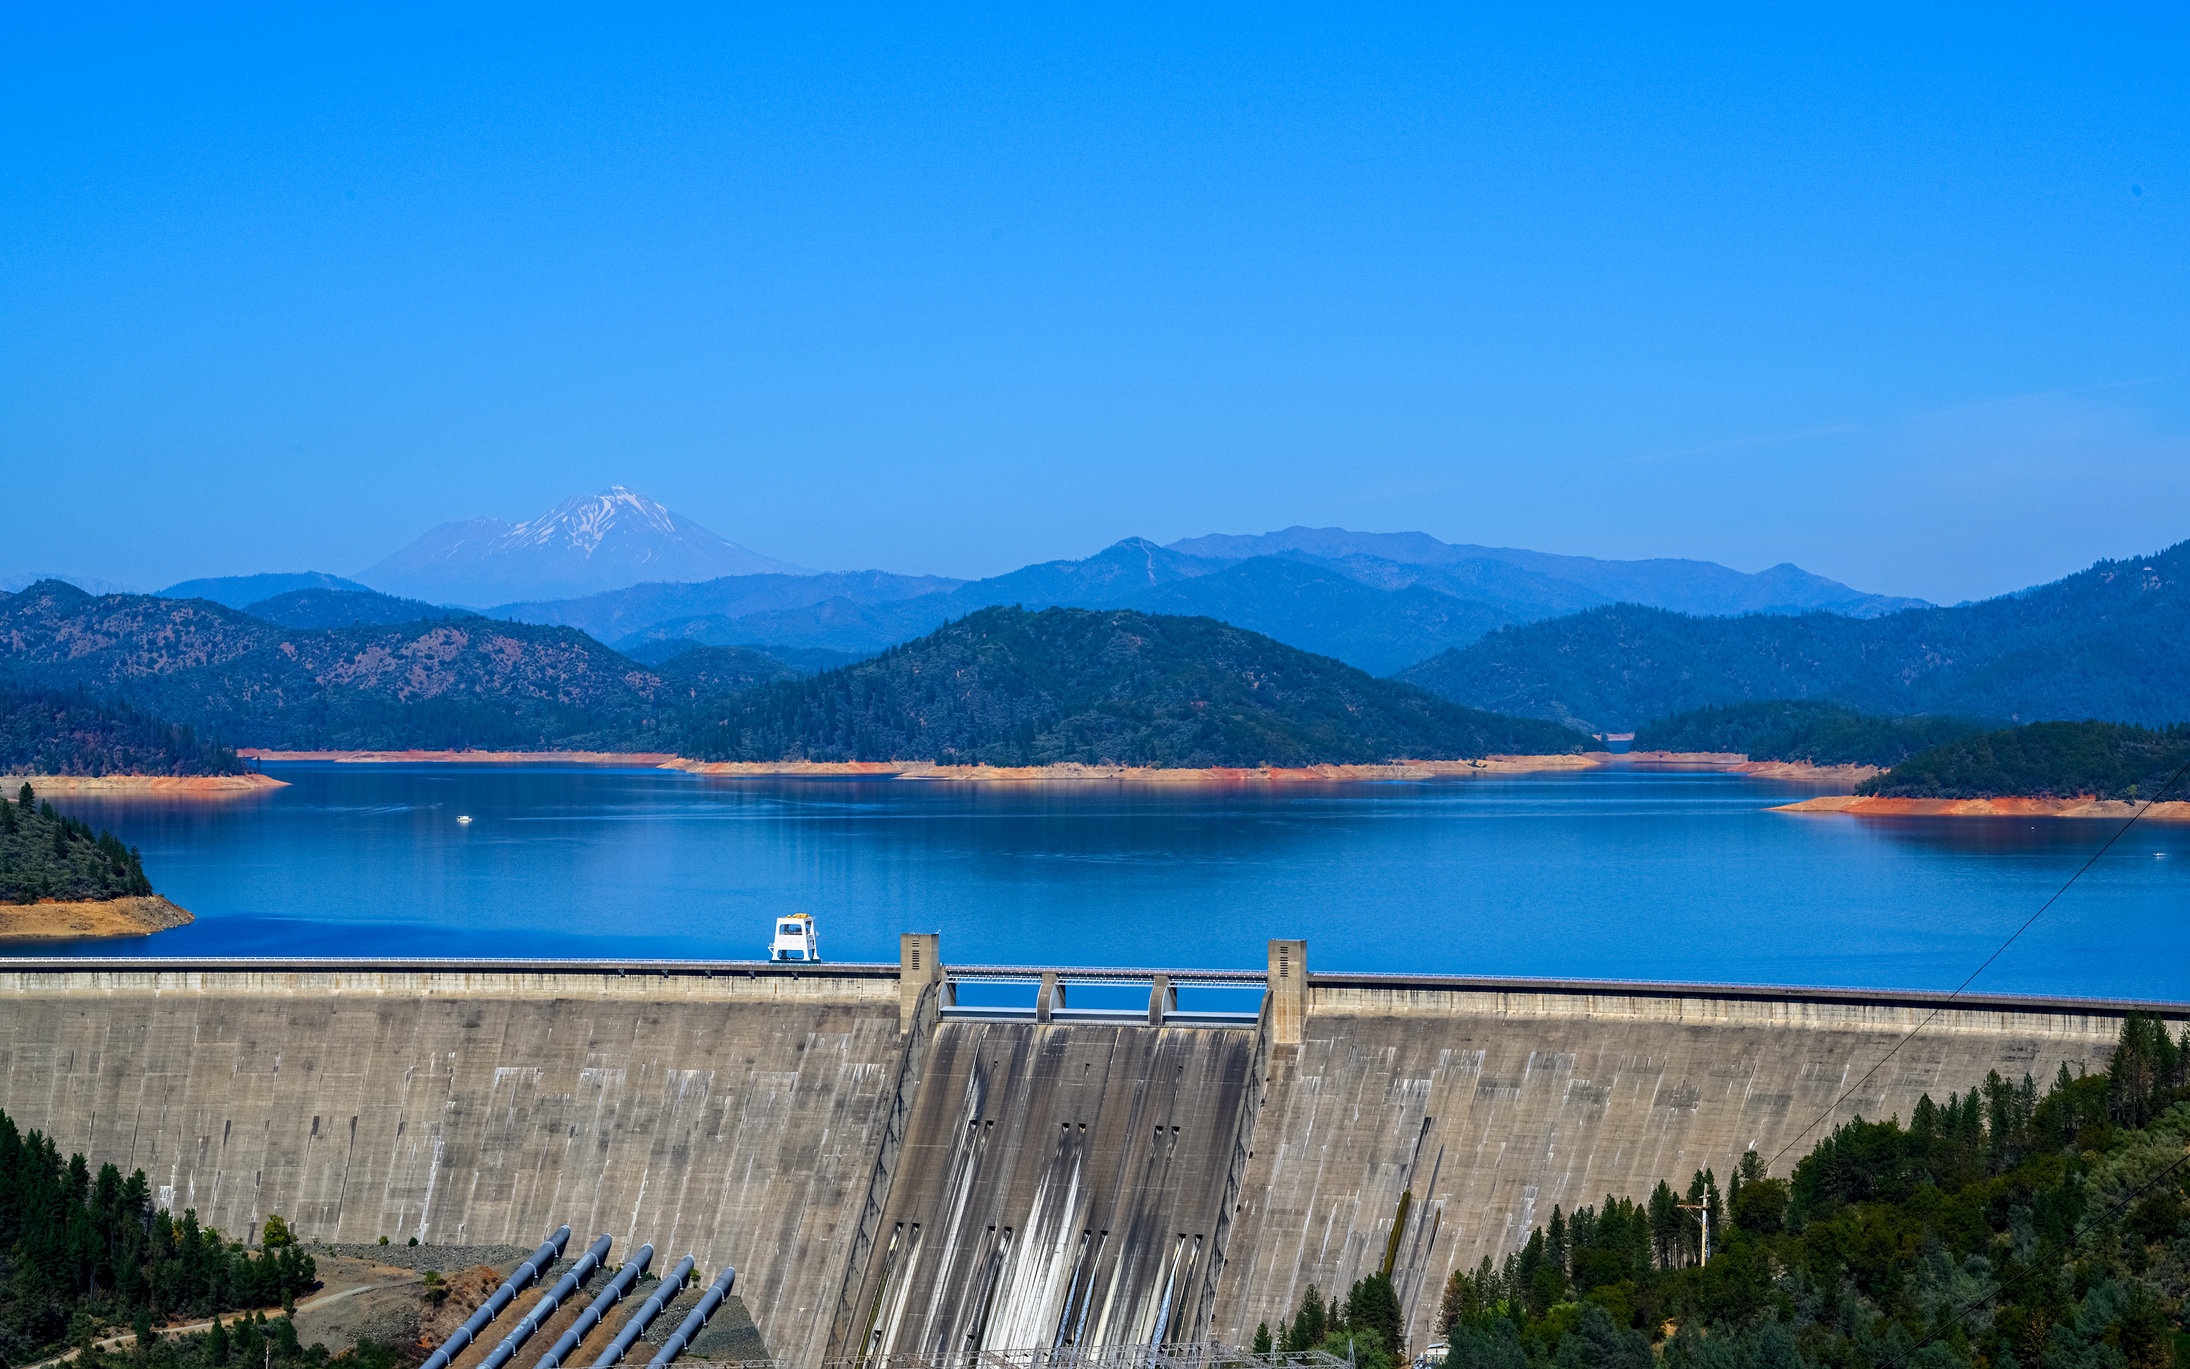 A view of Shasta Dam, a dam wall with big blue reservoir of Shasta lake behind it and treelined hills in the background.